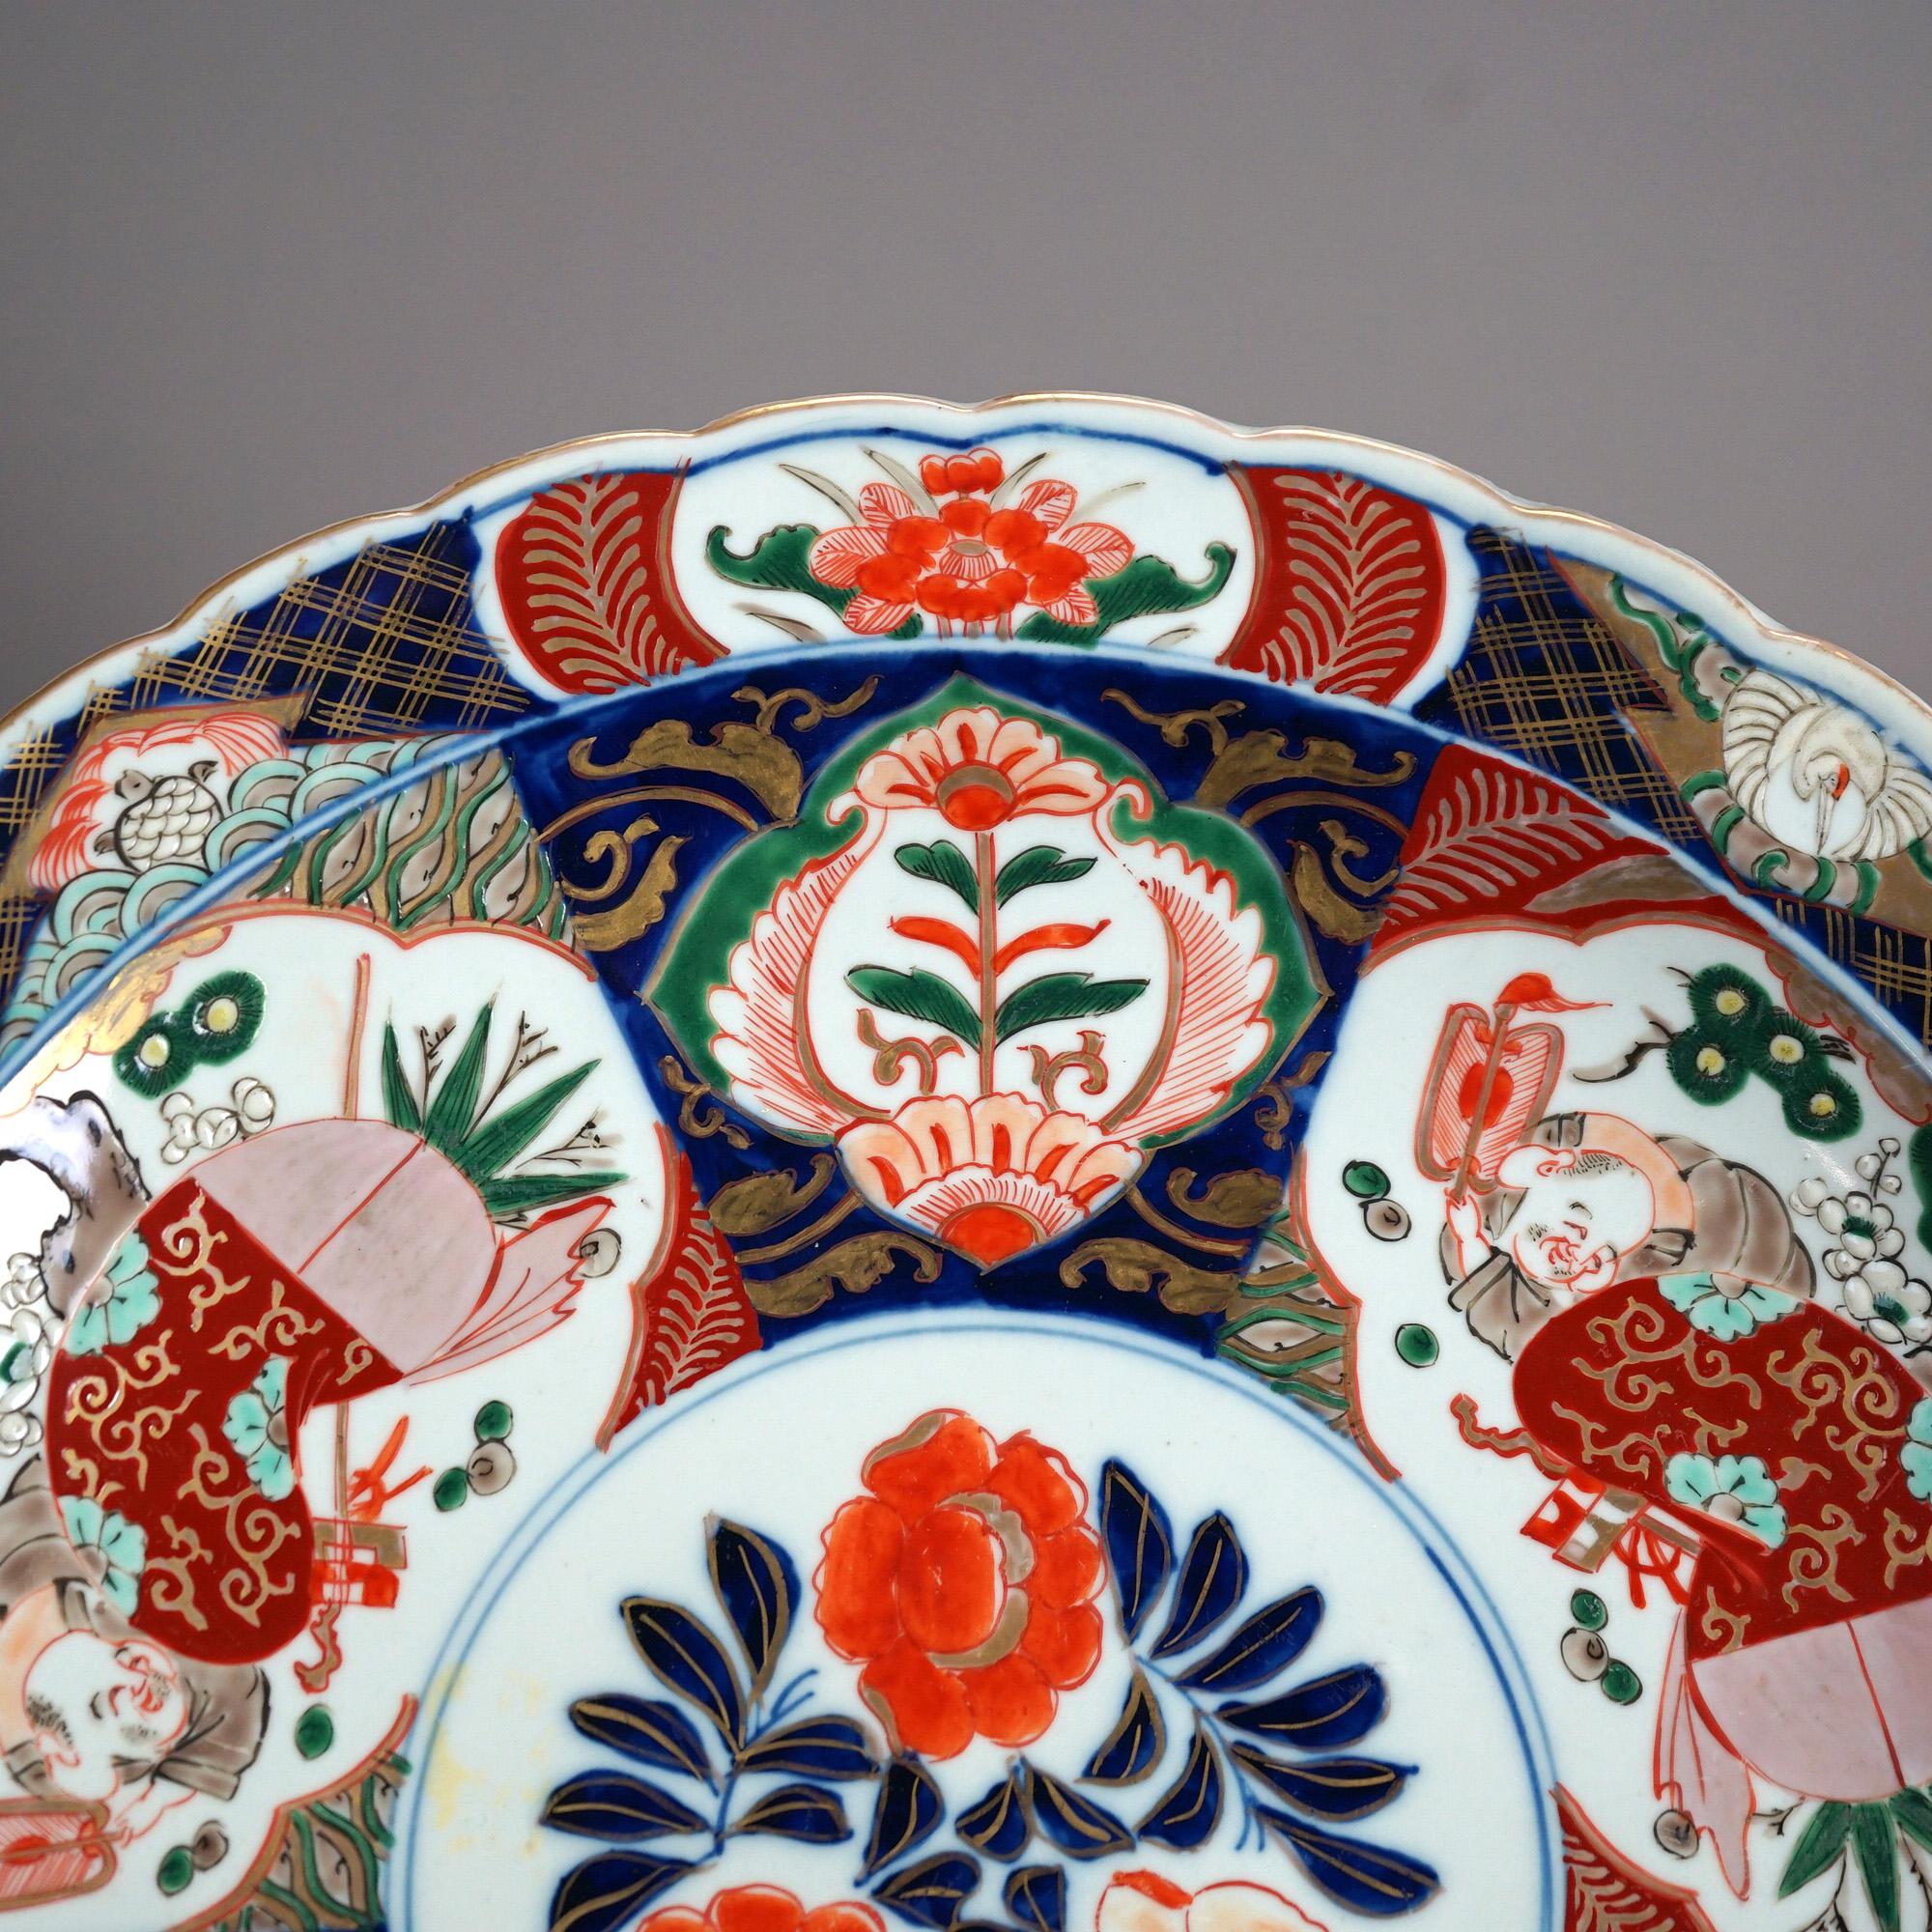 An antique Asian Imari charger offers porcelain construction with hand painted garden reserves, gilt highlights and en verso foliate pattern with central maker stamp, c1920

Measures- 2.25''H x 16''W x 16''D